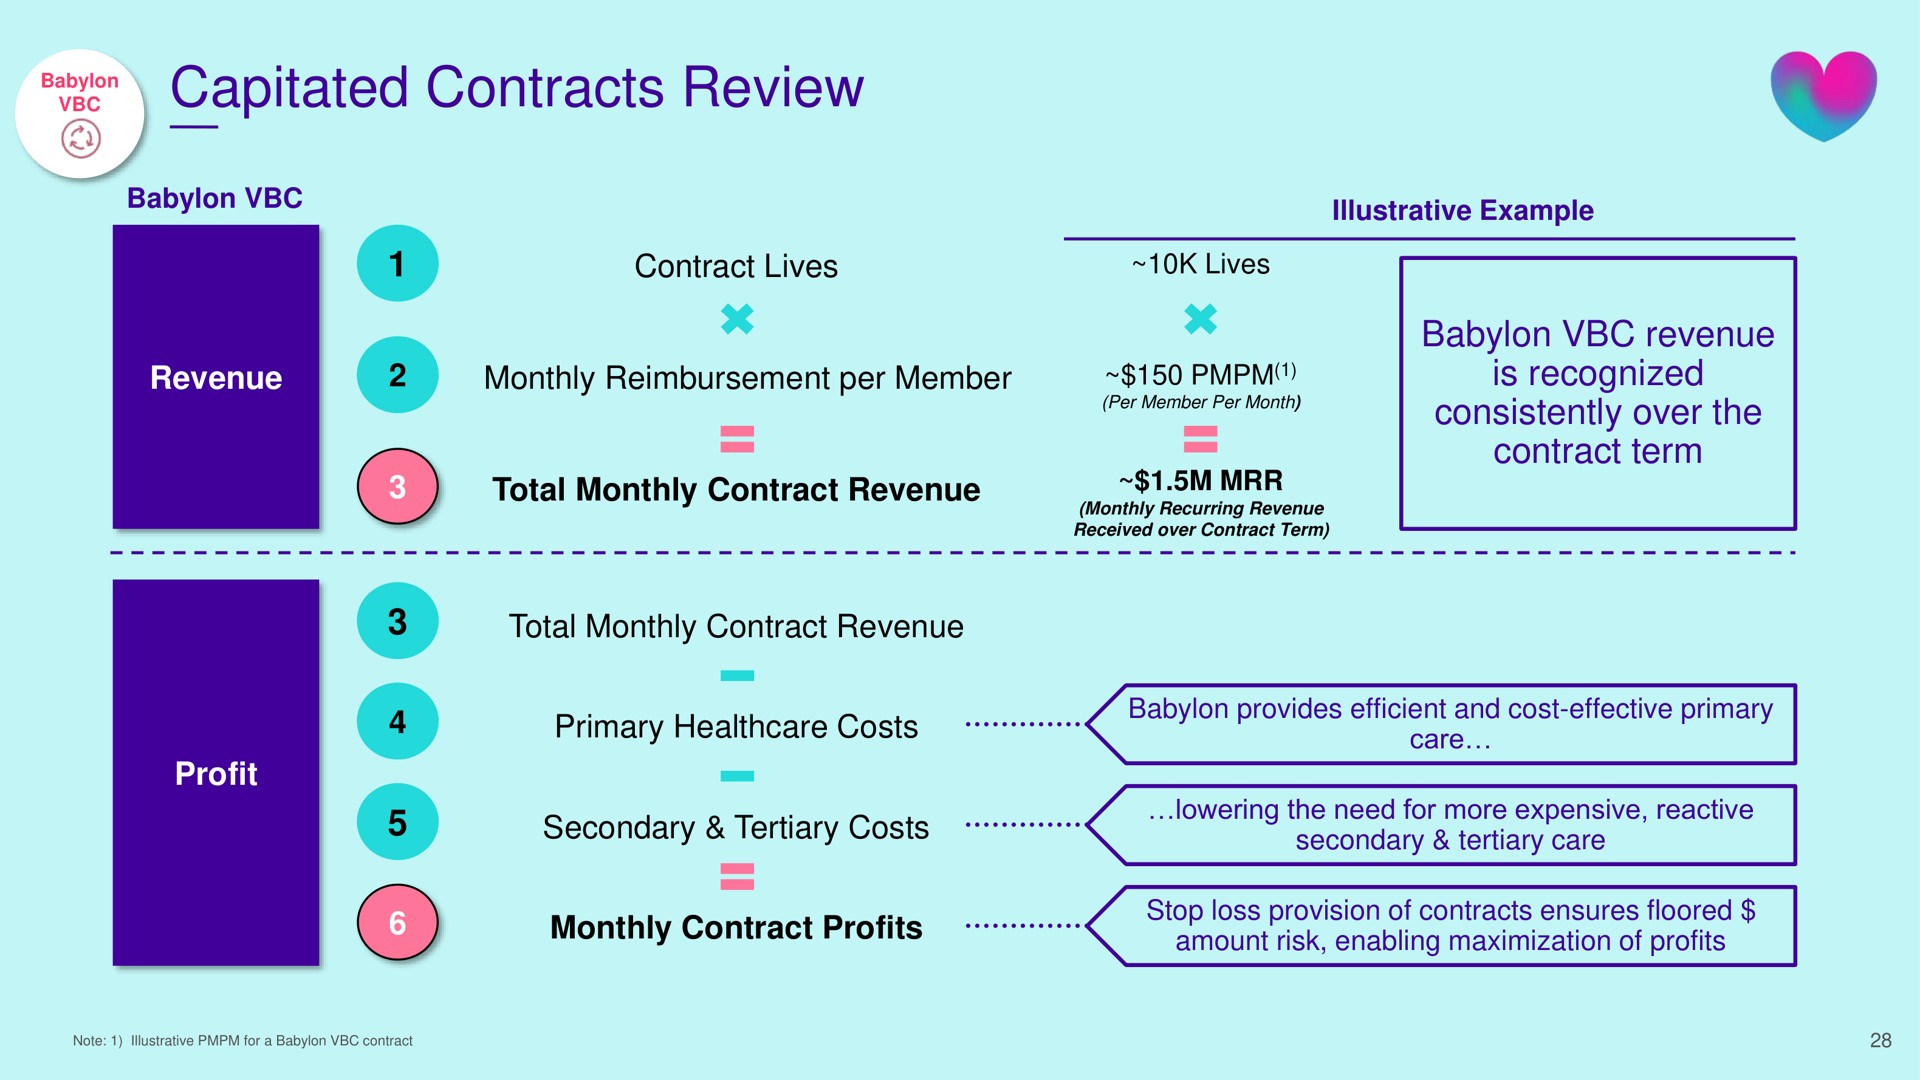 capitated contracts review | Babylon